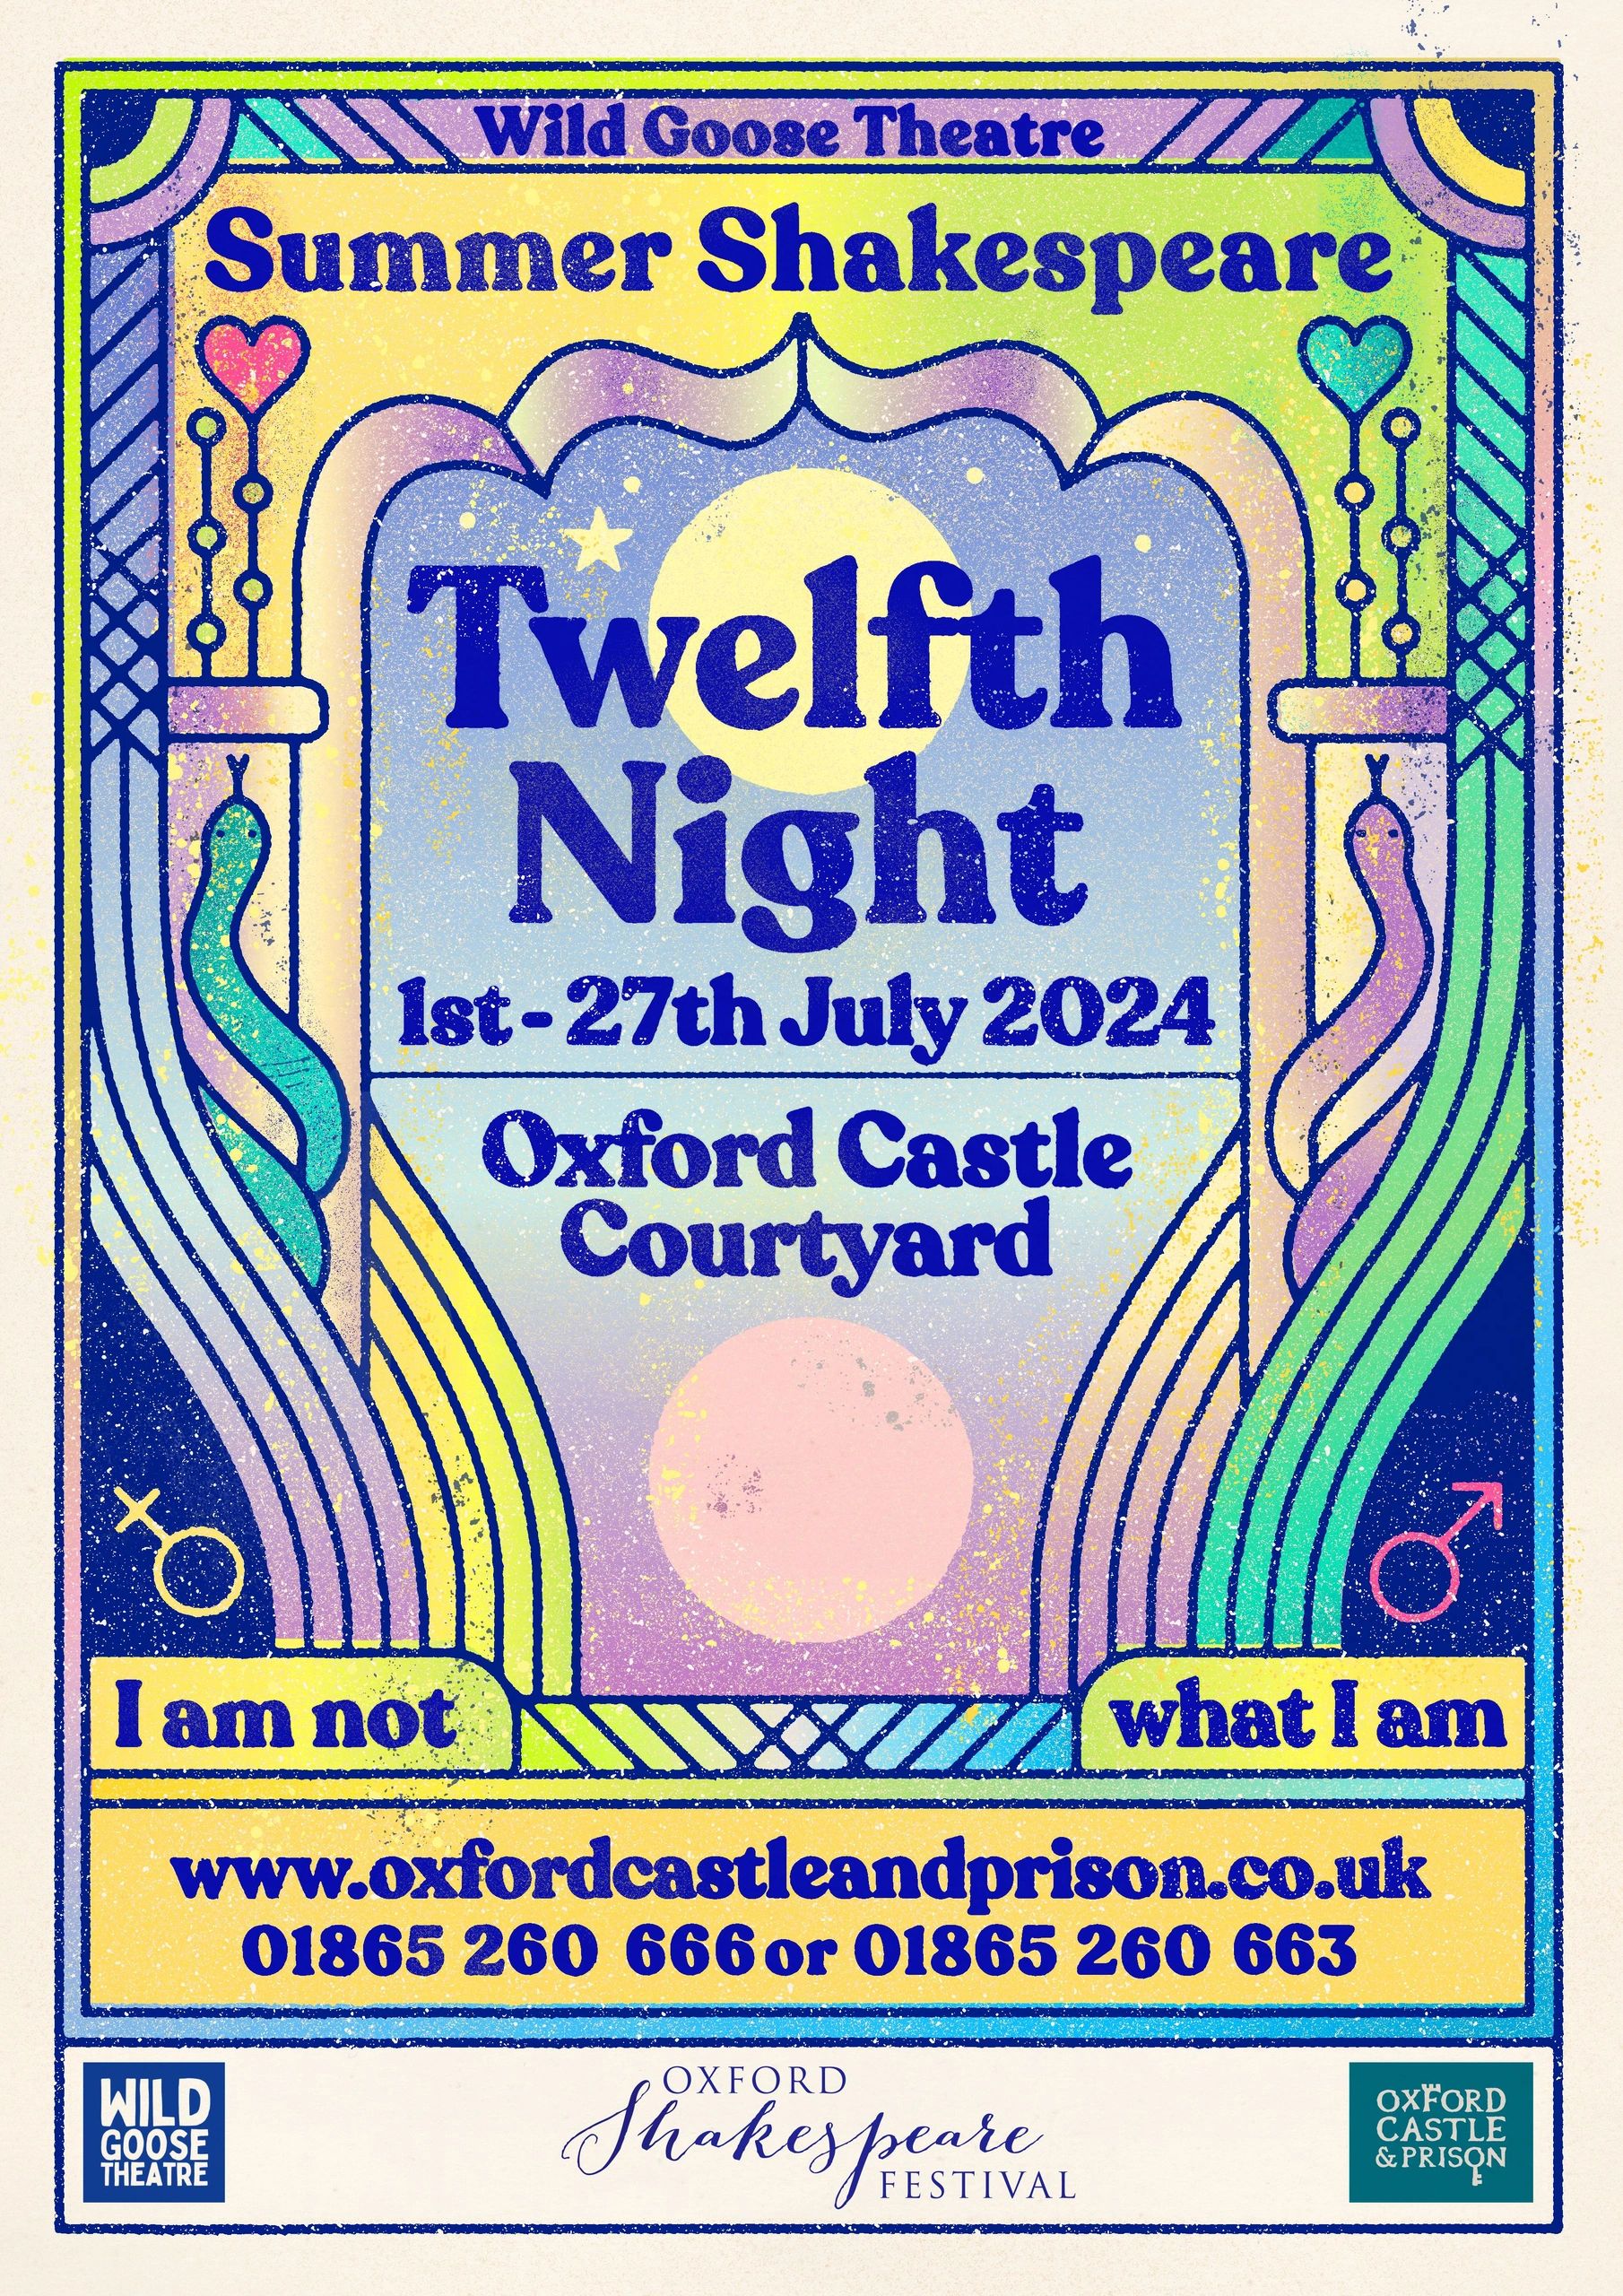 Poster for Wild Goose Theatre's 2024 production of Twelfth Night, designed by Ned Jolliffe